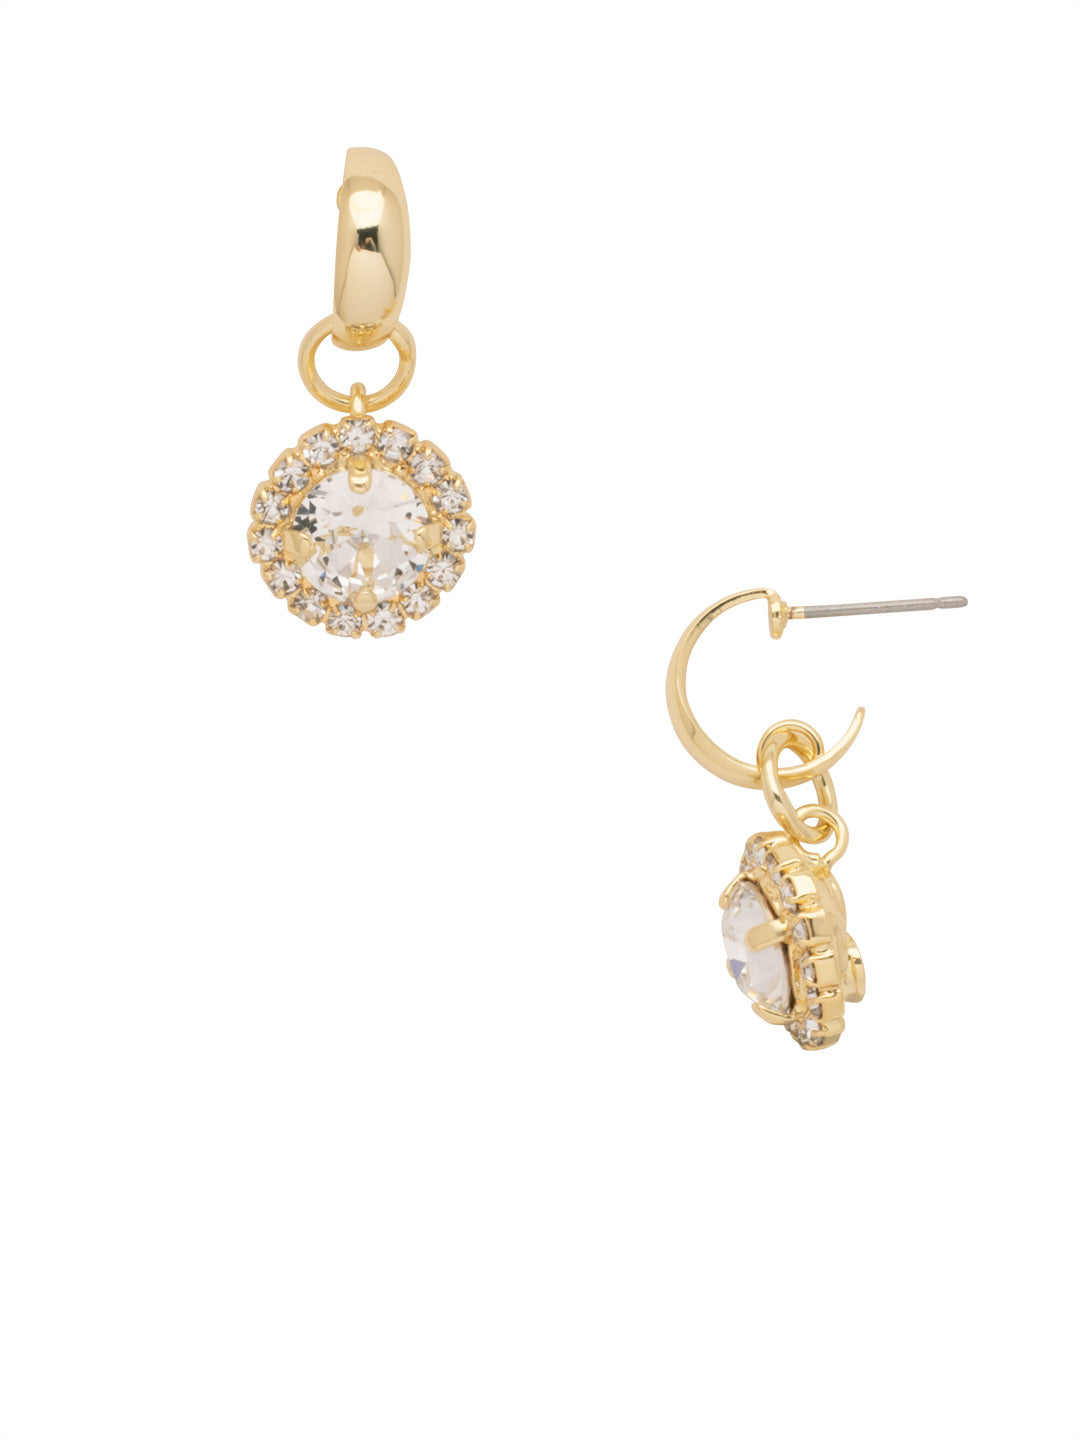 Haute Halo Huggie Dangle Earrings - 8EA2BGCRY - <p>The Haute Halo Huggie Dangle Earrings feature a round halo crystal dangling from a huggie hoop on a post. From Sorrelli's Crystal collection in our Bright Gold-tone finish.</p>